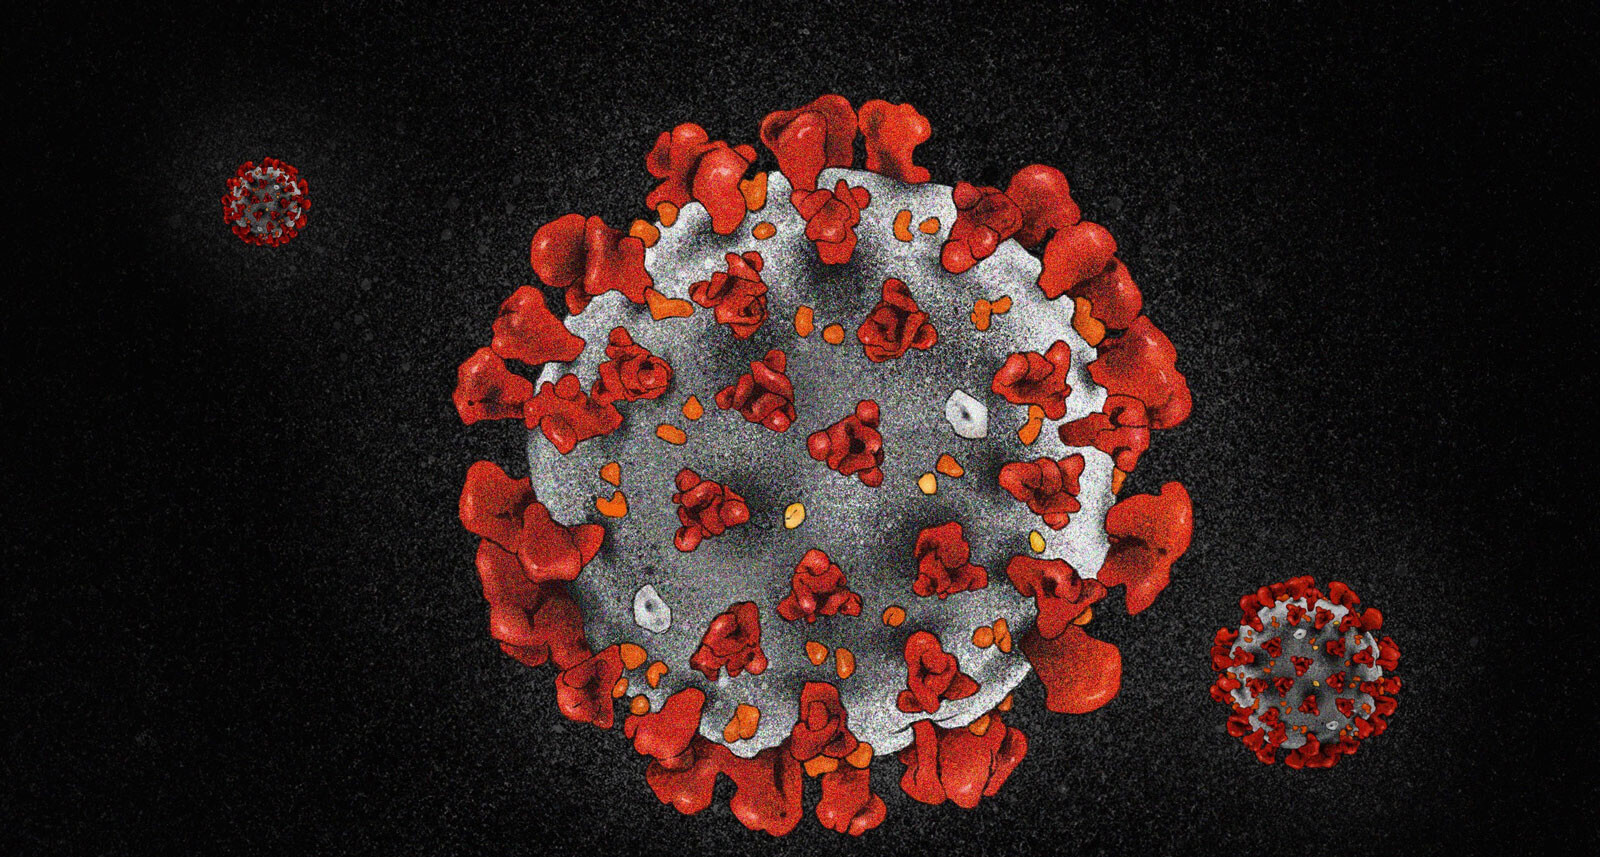 Three illustrated COVID-19 viruses are depicted on a black background. Red spikes surround the round gray virus.